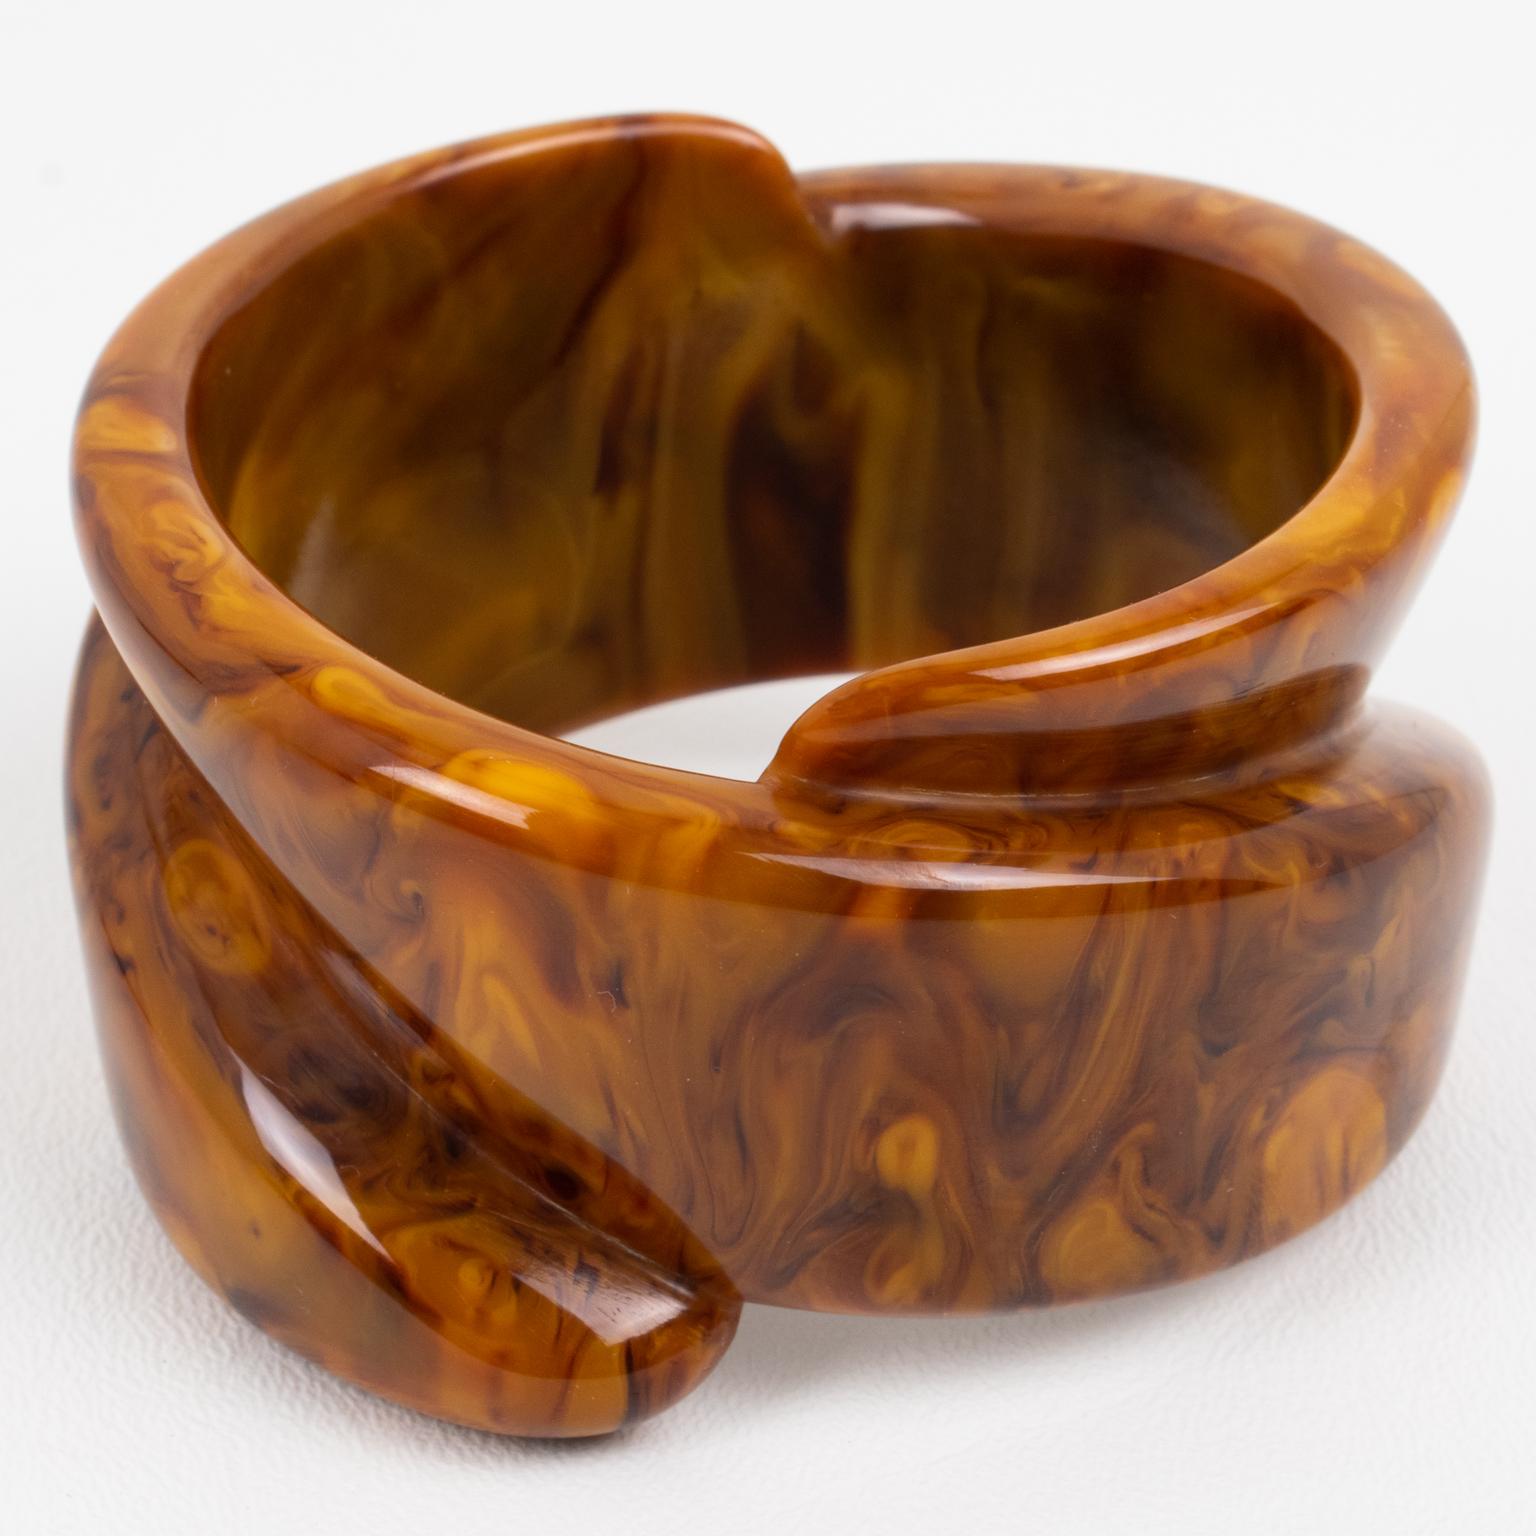 This is a spectacular hand-carved chocolate sundae marble Bakelite bracelet bangle. The piece boasts a massive extra-wide shape with an incredible carved coiled design. The bangle has an intense chocolate brown color with cloudy swirling and looks